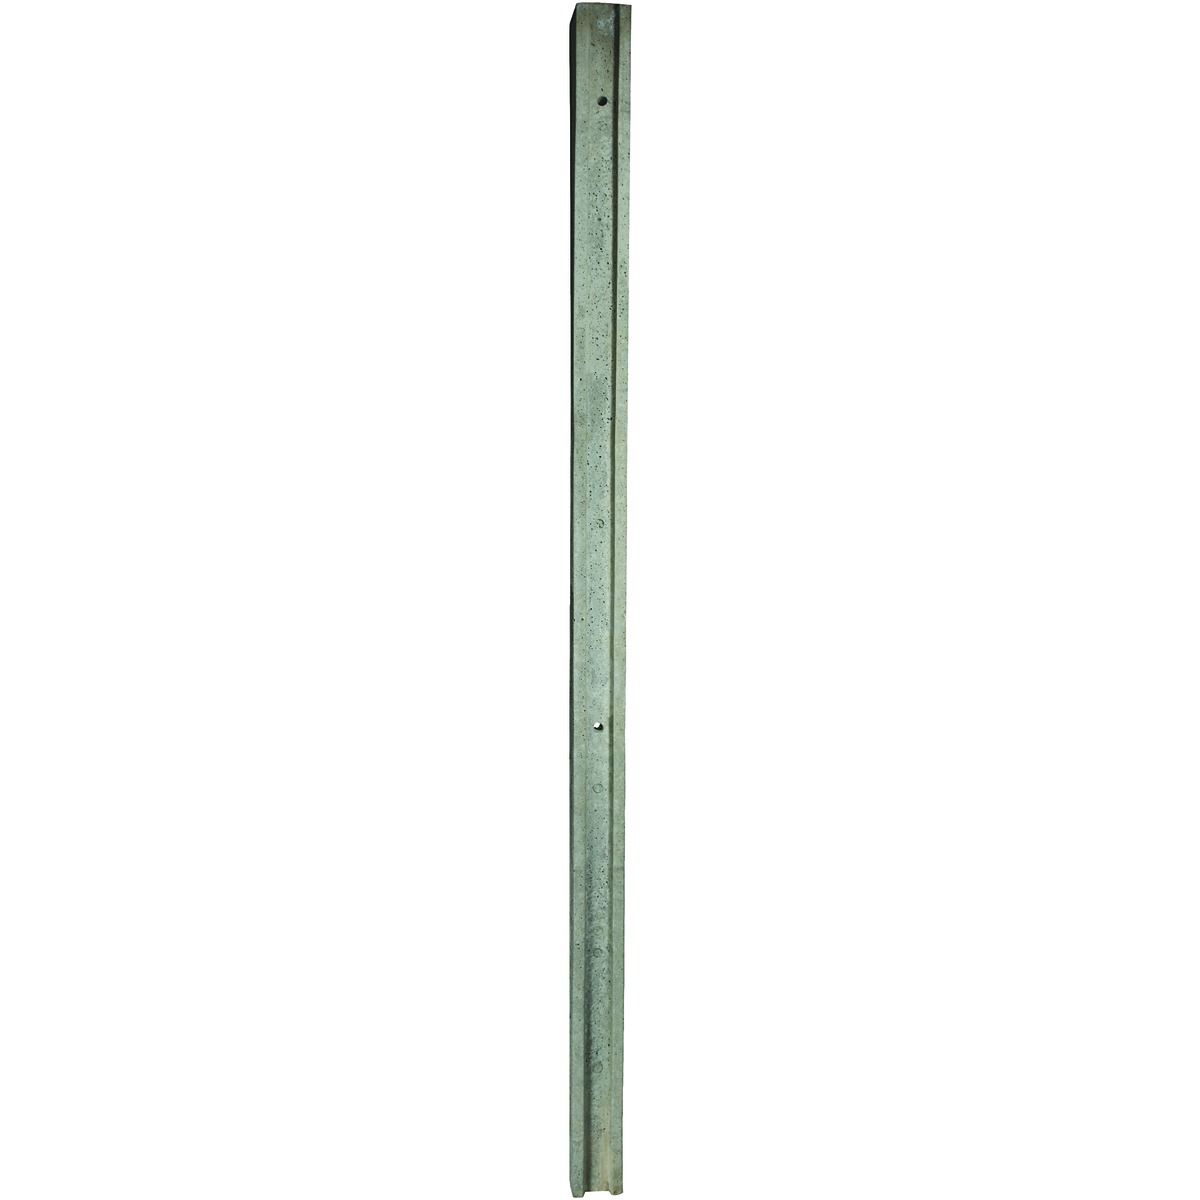 Image of Wickes Slotted Concrete Fence Post - 100 x 60mm x 2.4m